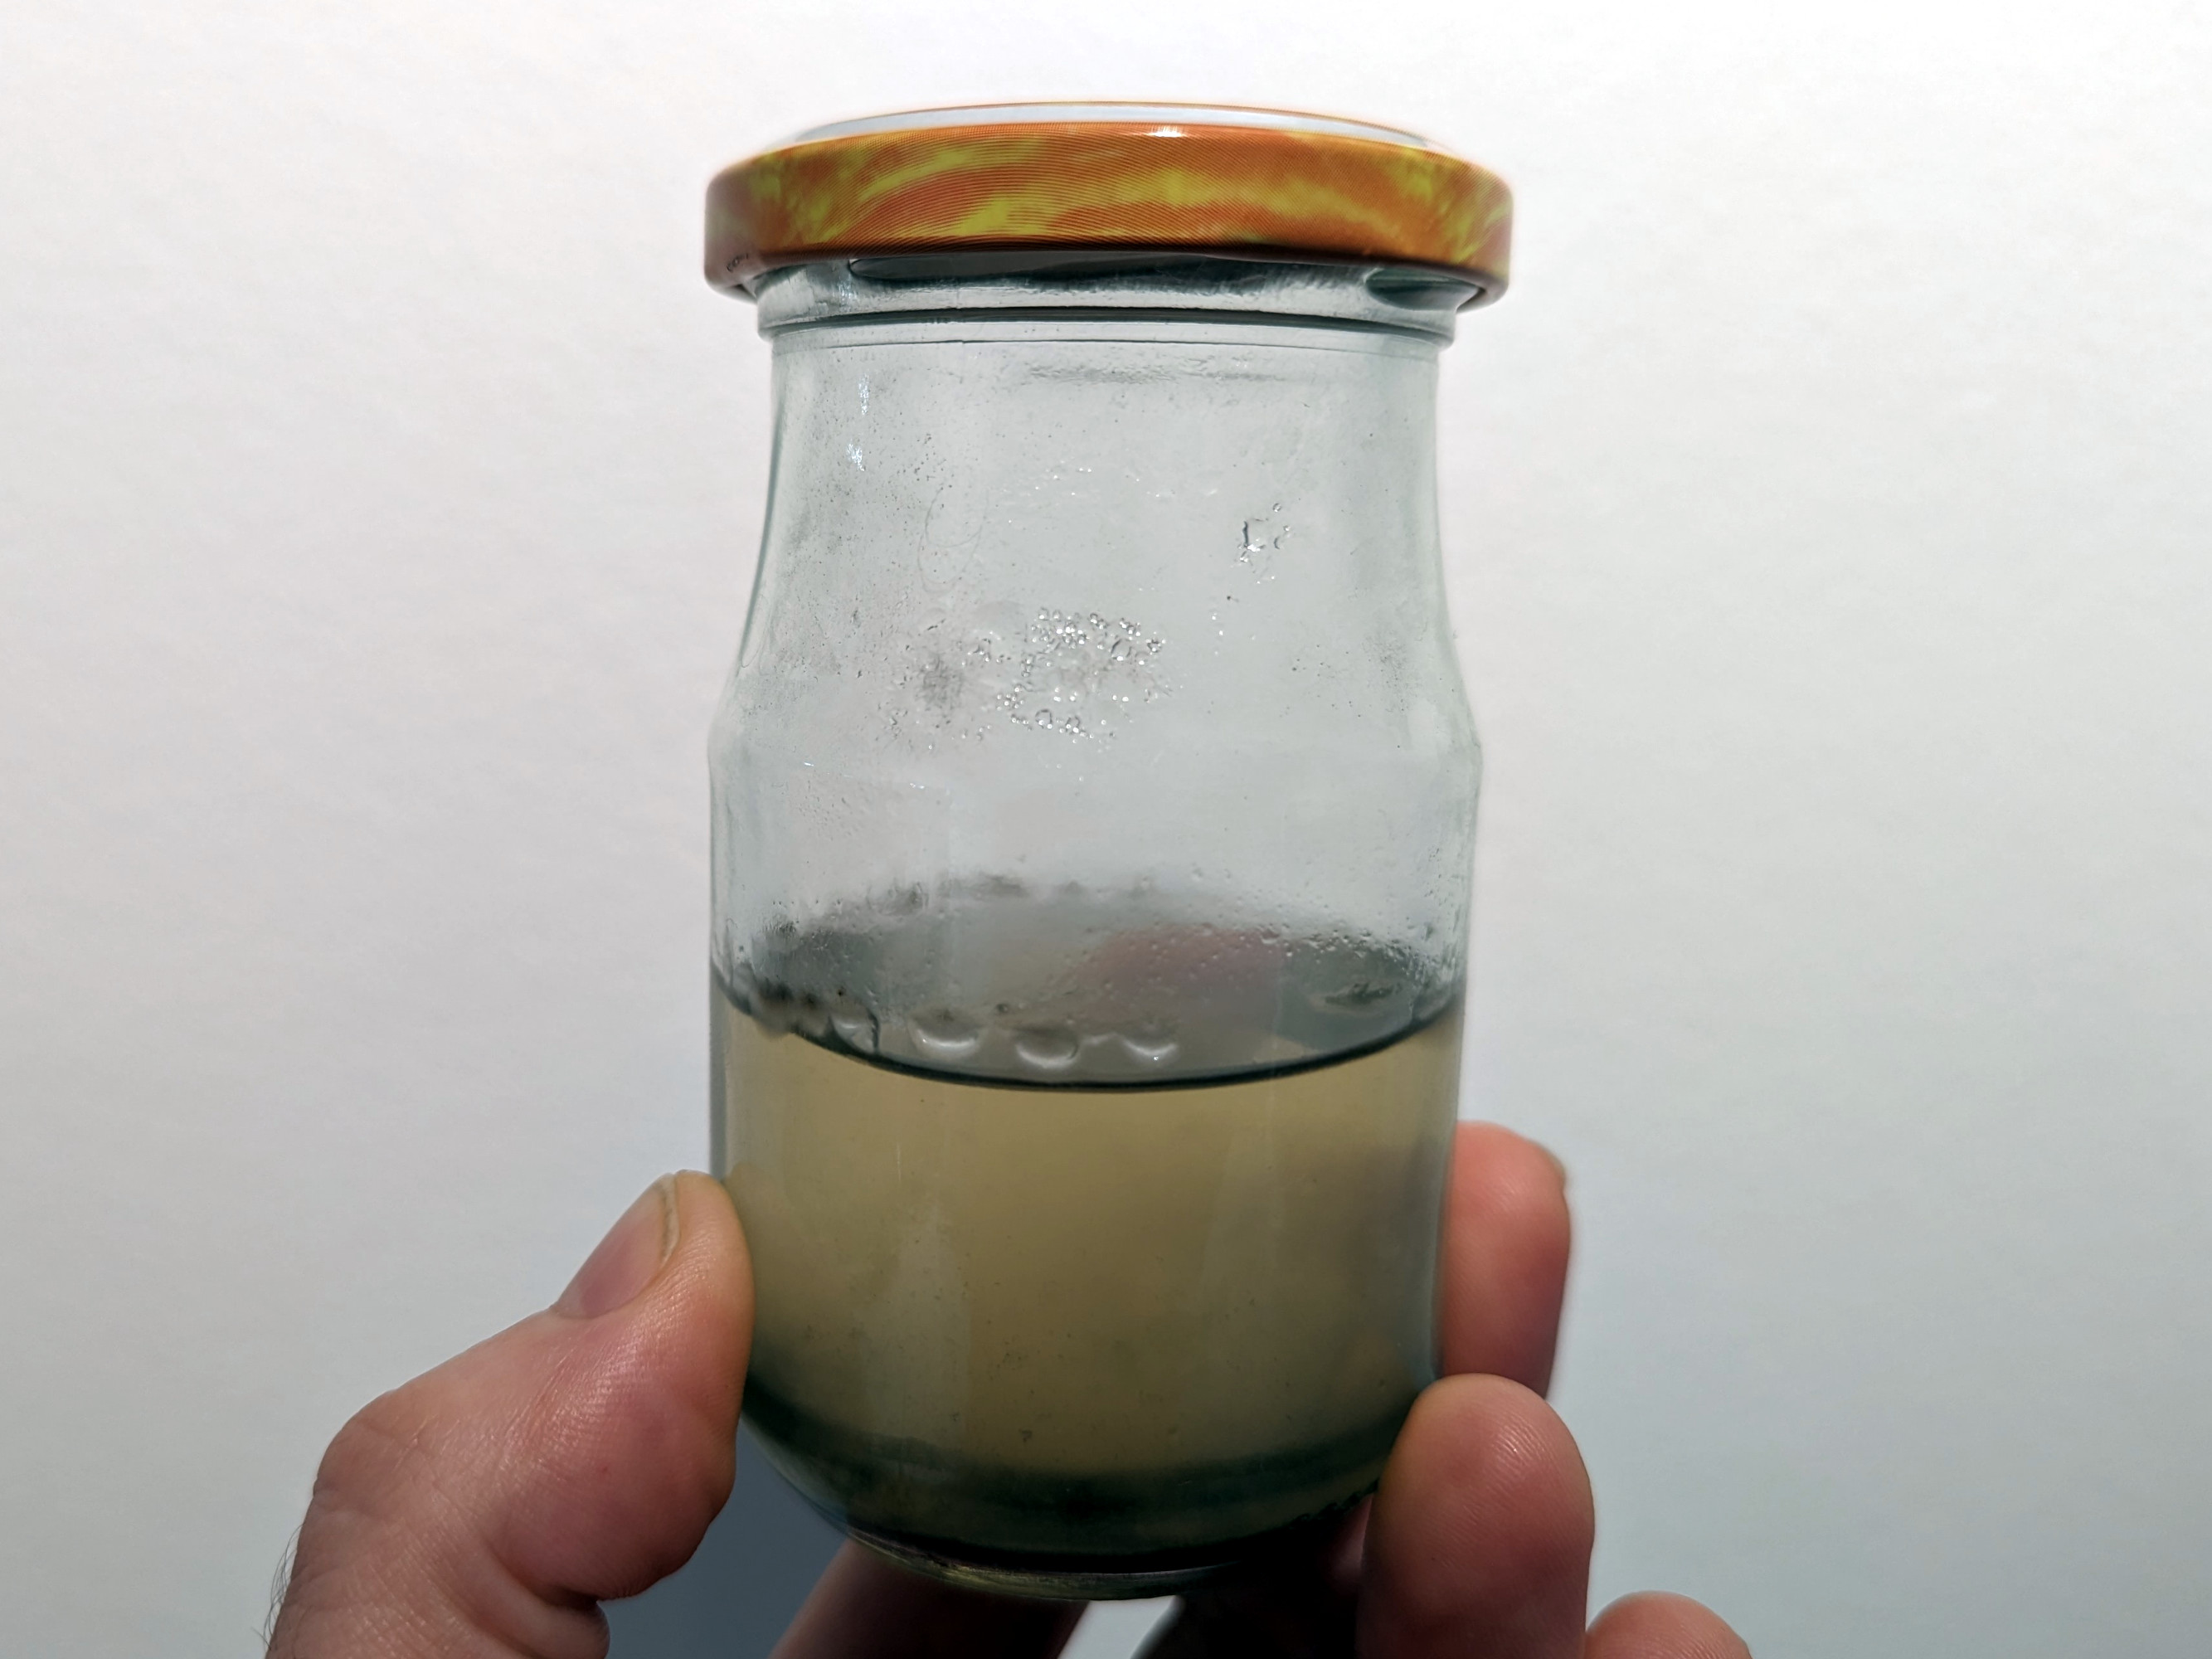 A small glass jar with cloudy beige liquid inside and a dark sludge at the bottom. There is some mould growth floating on top of the liquid.